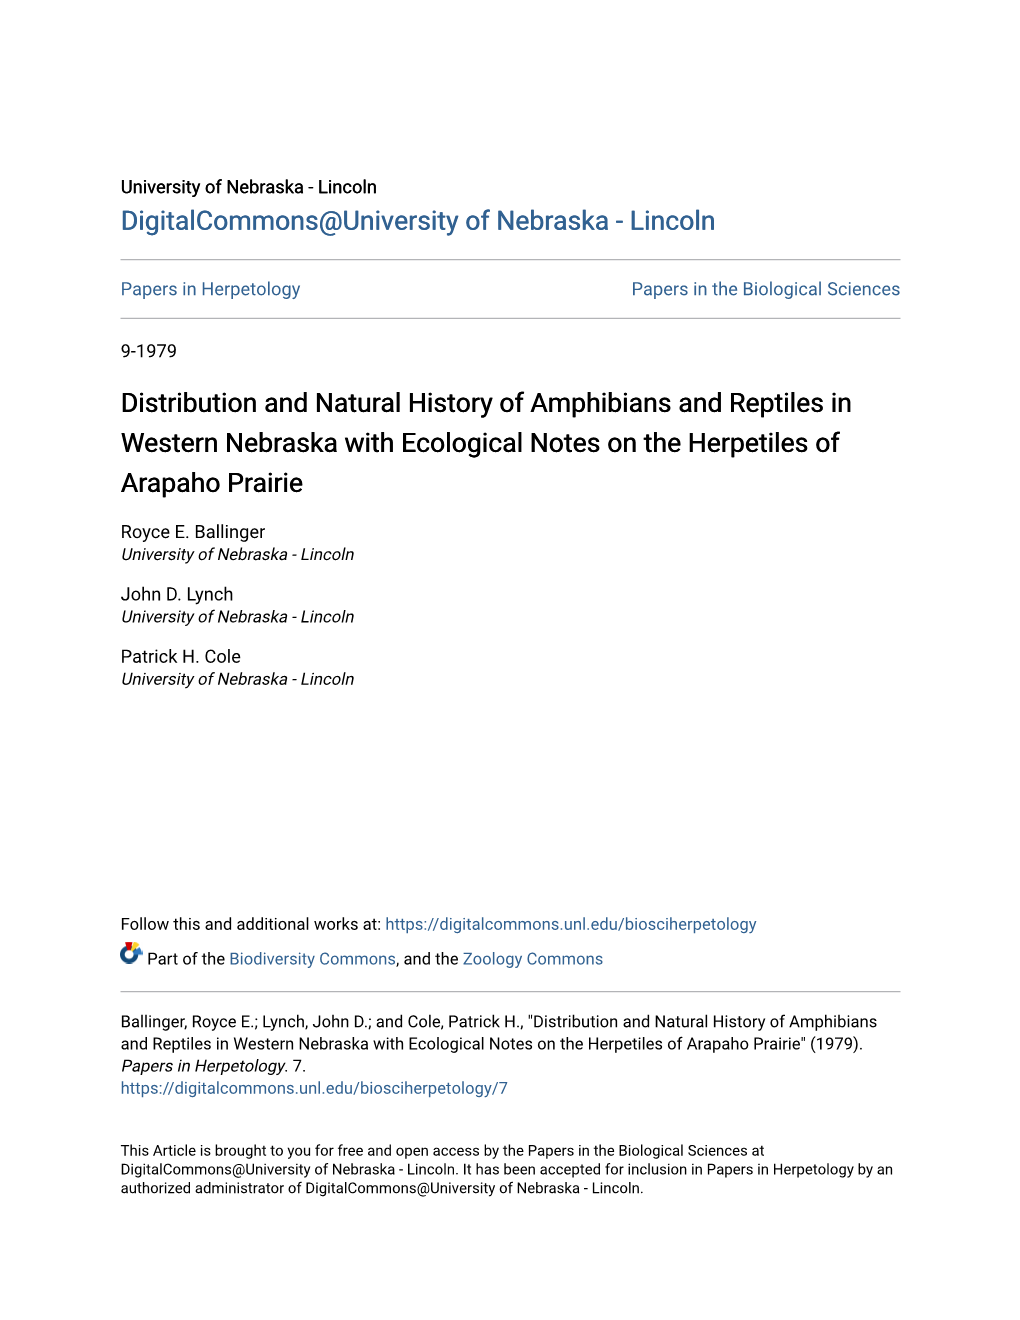 Distribution and Natural History of Amphibians and Reptiles in Western Nebraska with Ecological Notes on the Herpetiles of Arapaho Prairie